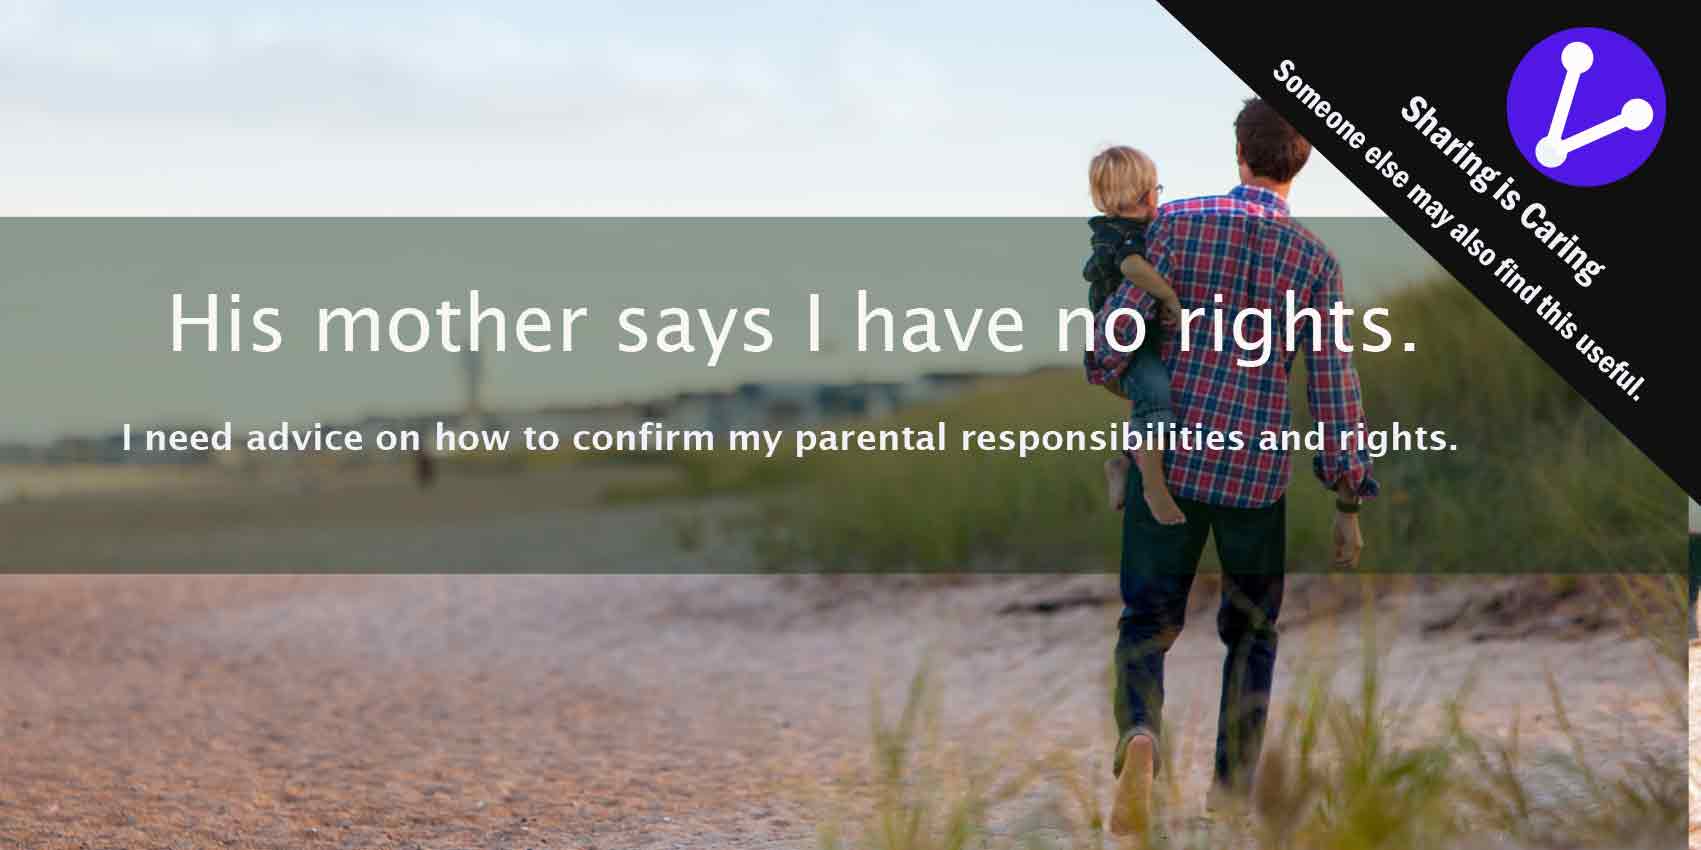 Father’s Parental Responsibilities and Rights to his Child